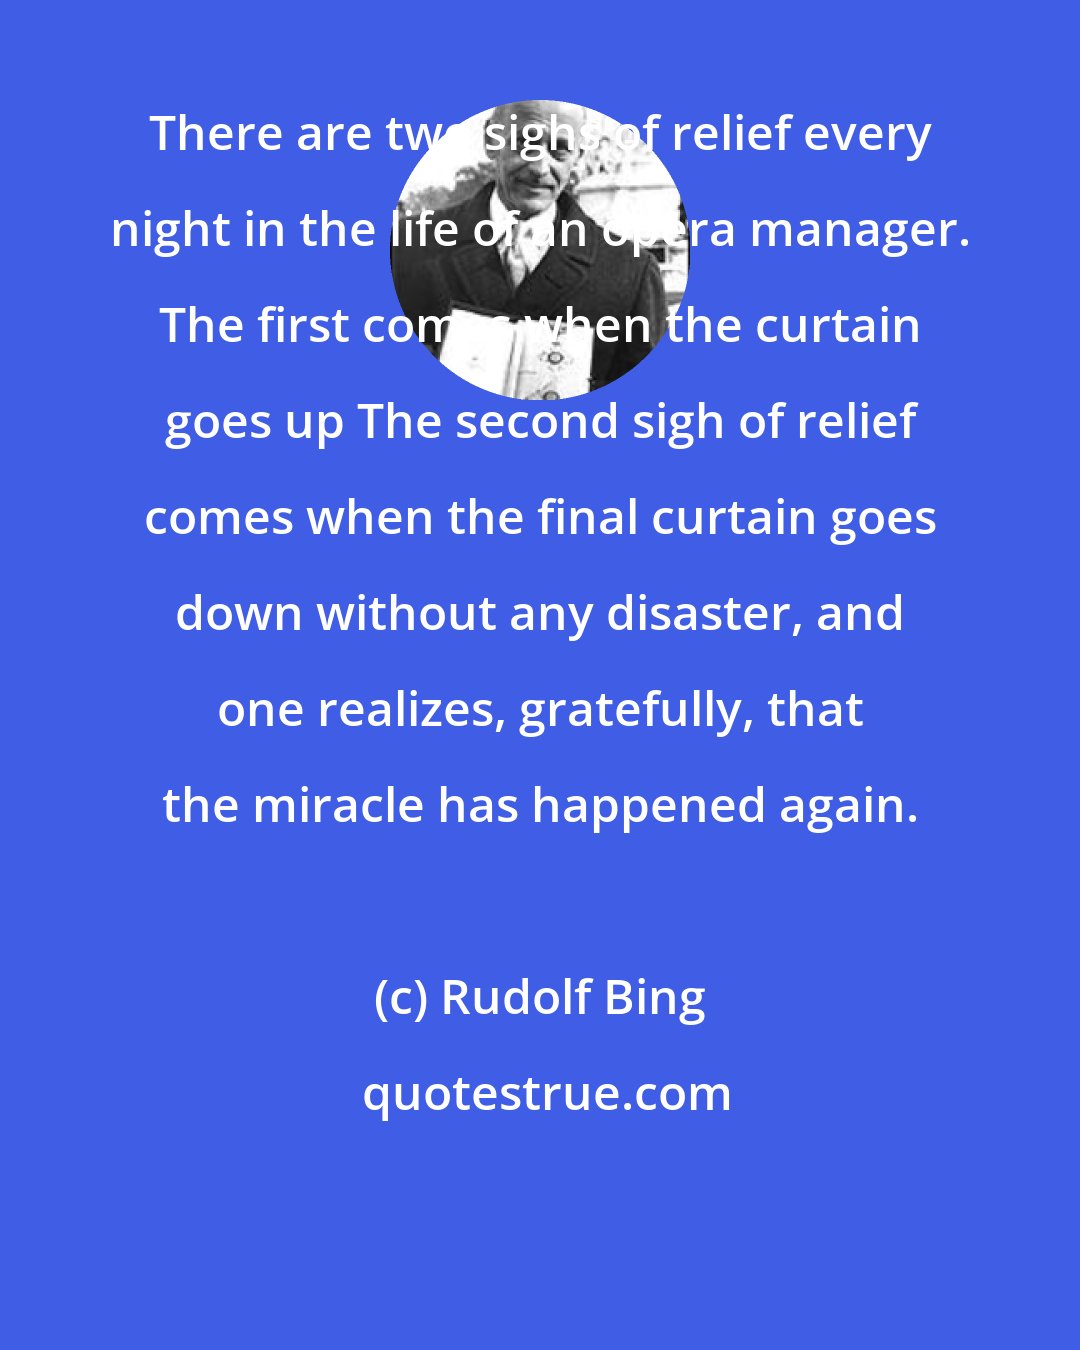 Rudolf Bing: There are two sighs of relief every night in the life of an opera manager. The first comes when the curtain goes up The second sigh of relief comes when the final curtain goes down without any disaster, and one realizes, gratefully, that the miracle has happened again.